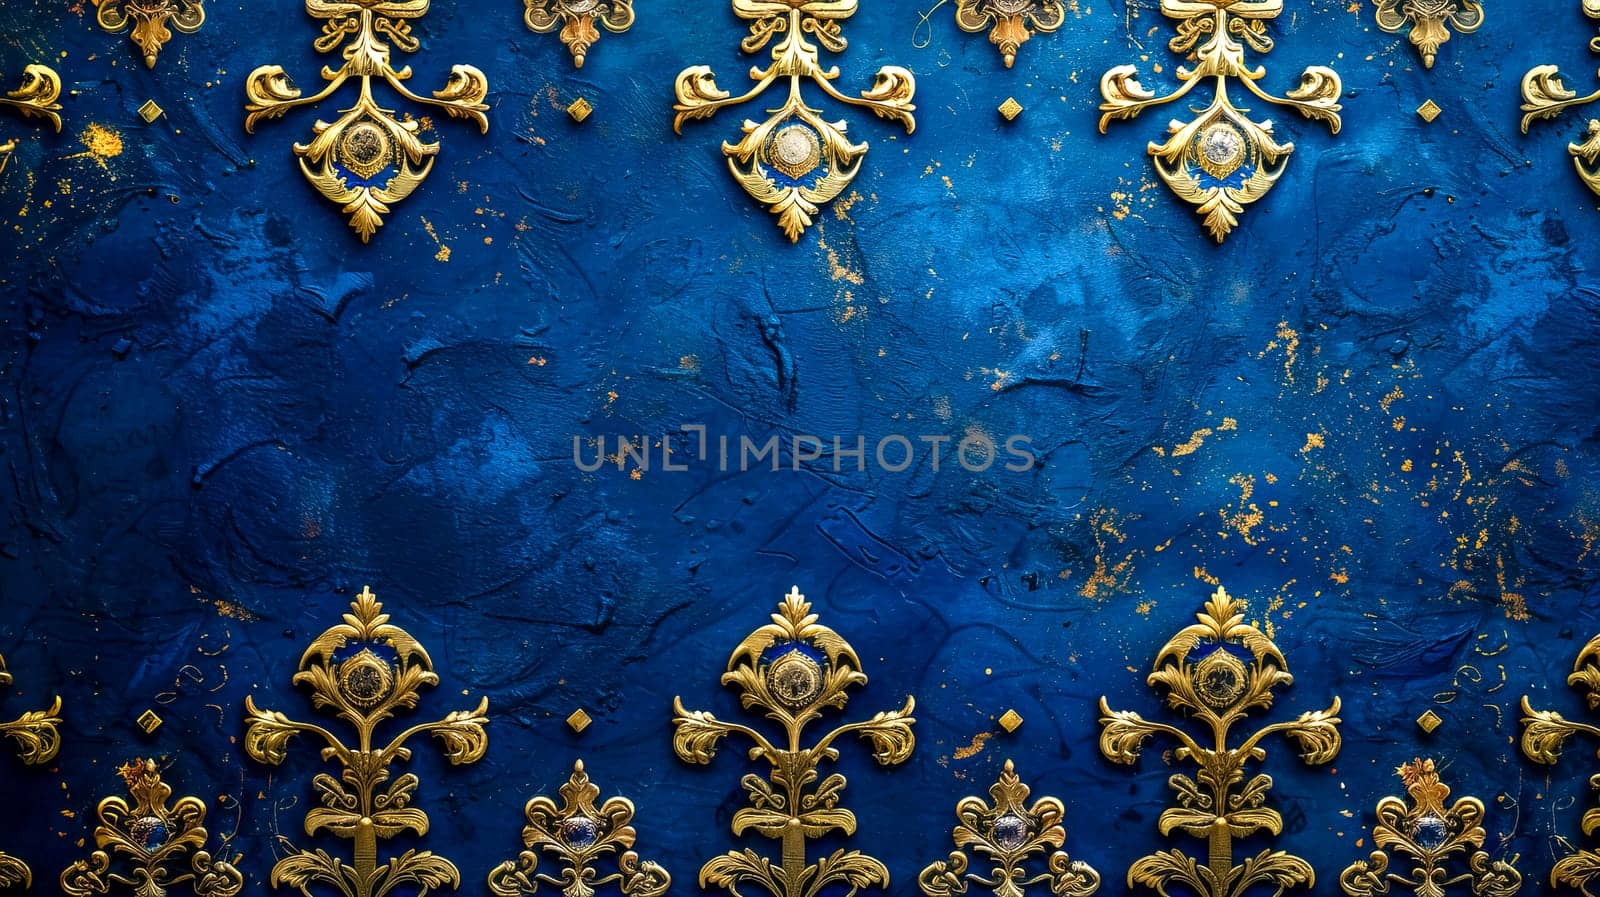 Royal blue vintage wallpaper with golden accents by Edophoto